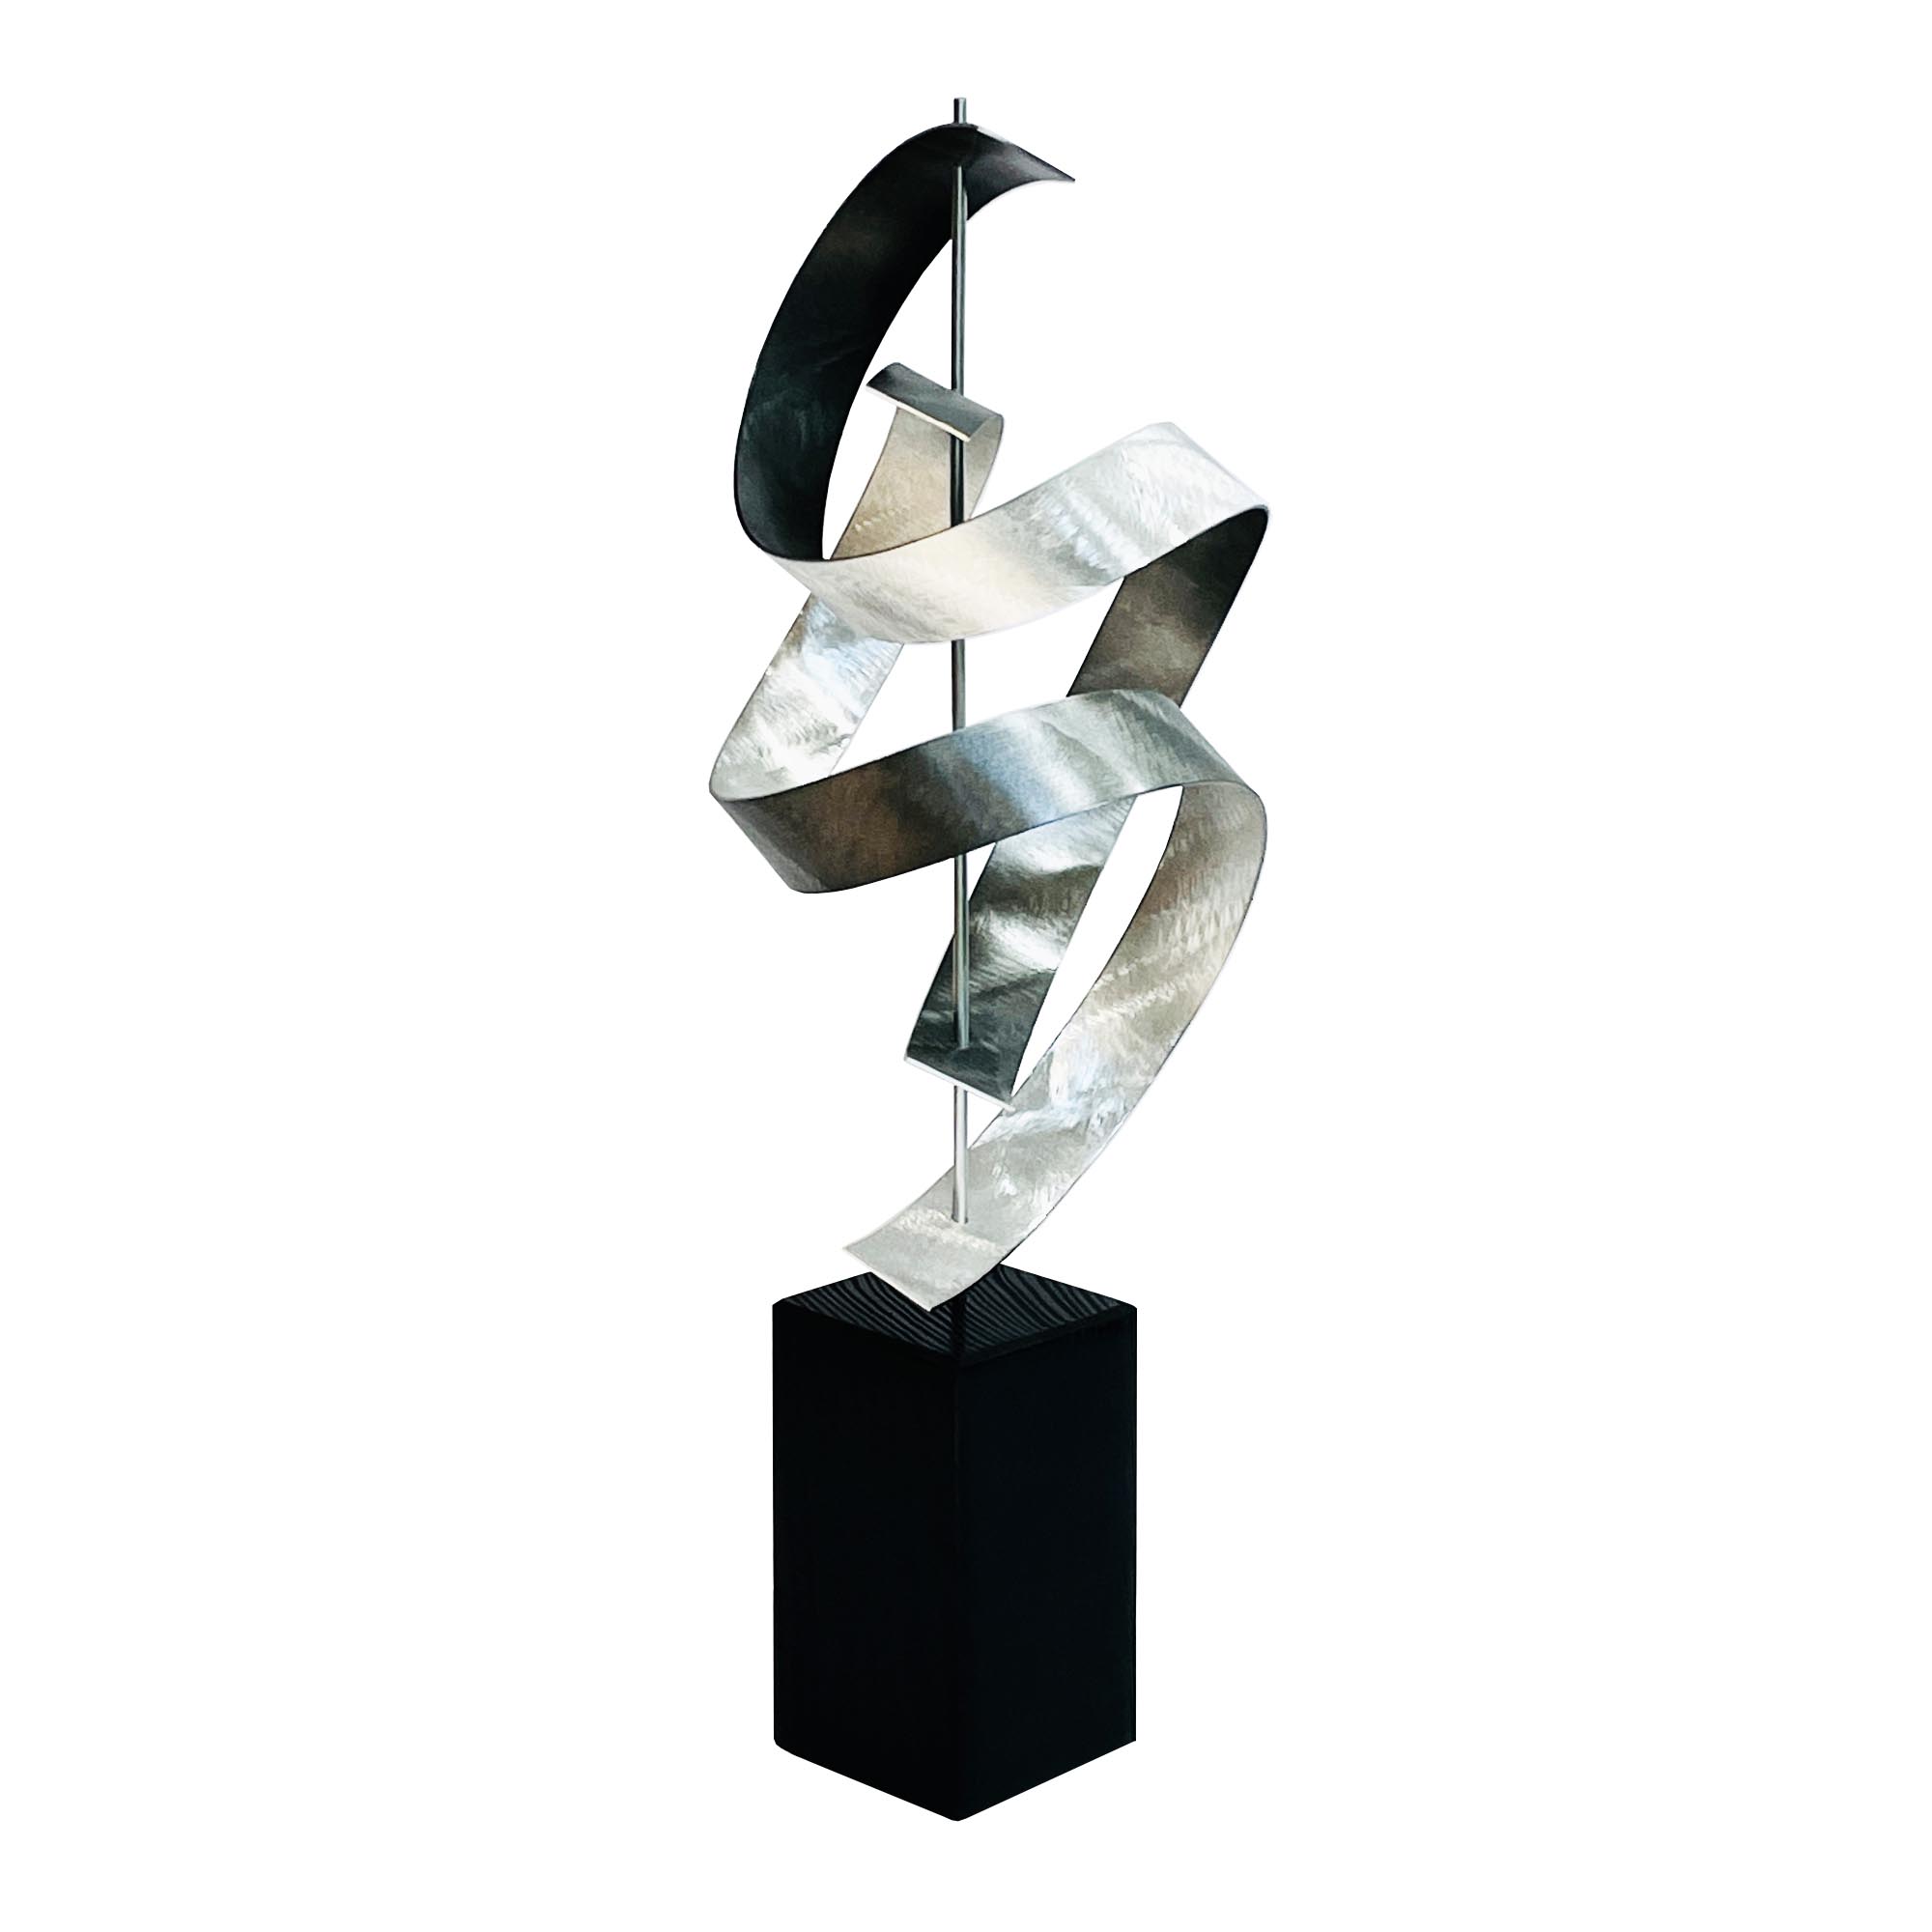 Waltz v3 by Jackson Wright - Abstract Metal Sculpture, Kinetic Sculpture - Image 2